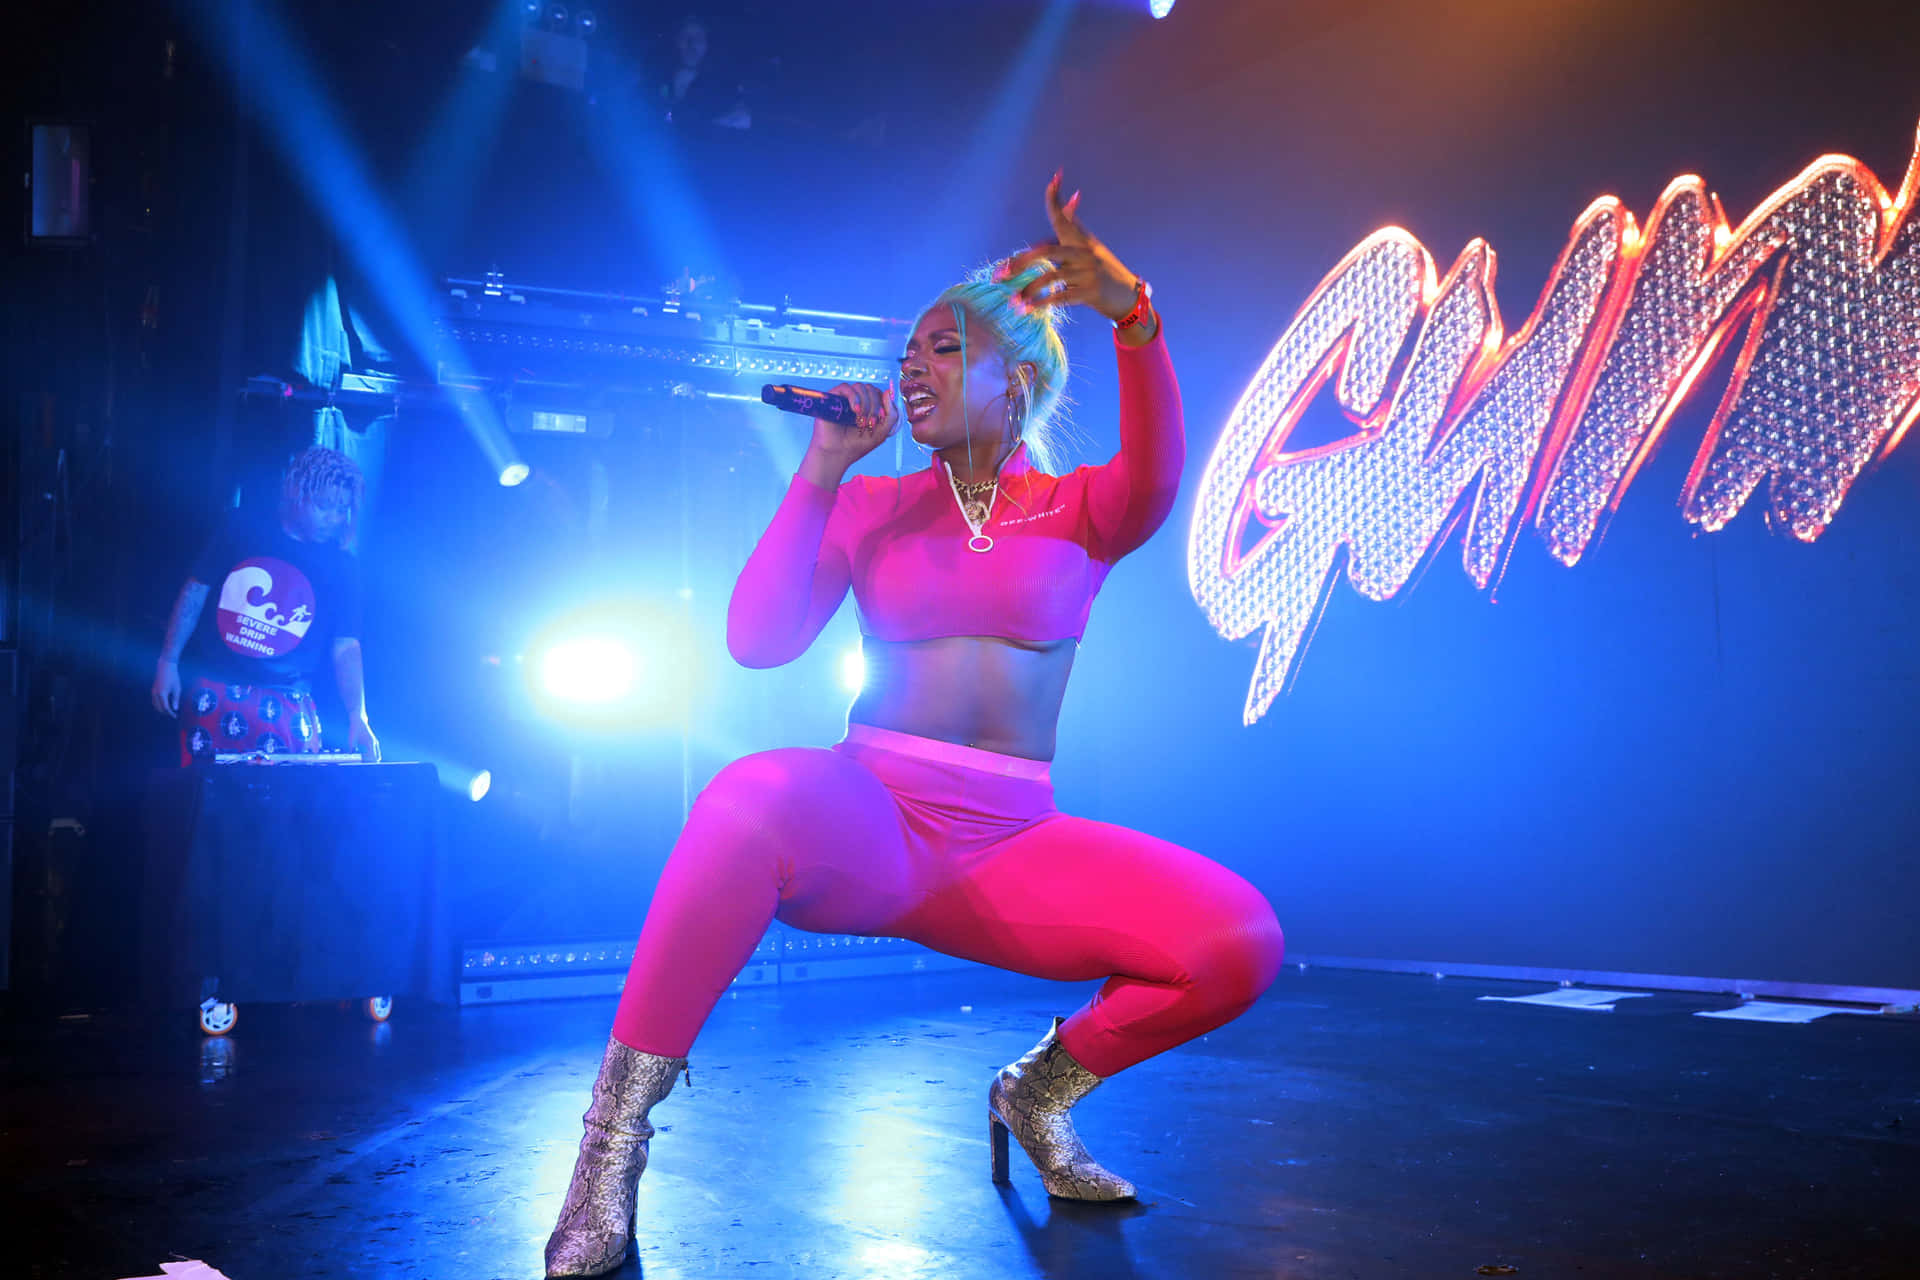 Megan Thee Stallion strikes a stunning pose in a stylish outfit